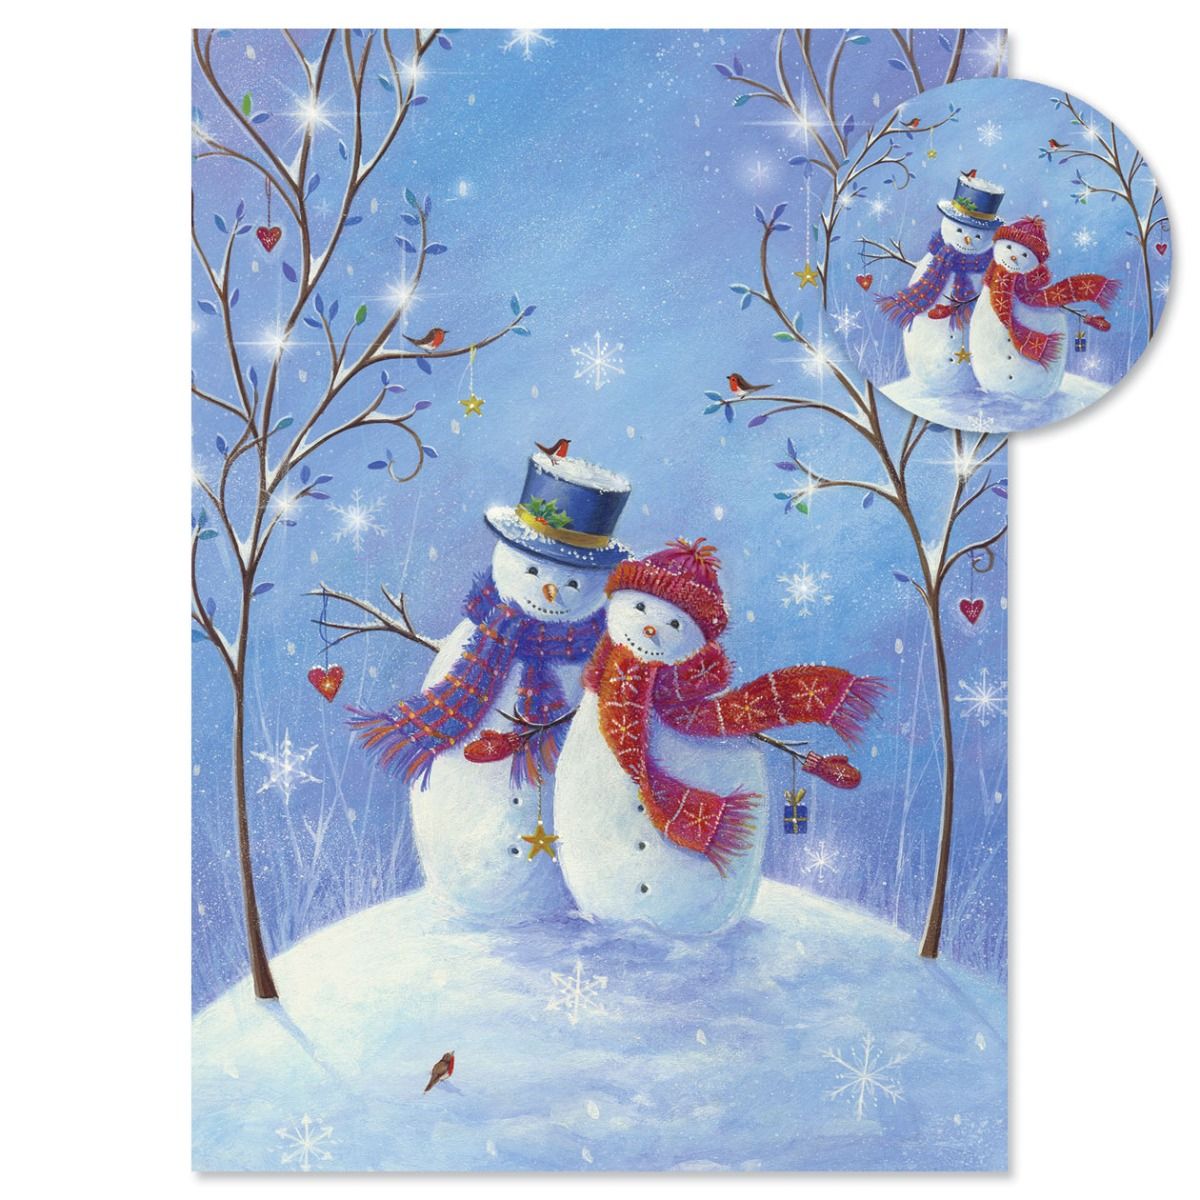 Snowy Snuggles Christmas Cards - Nonpersonalized Christmas Cards Multicolor